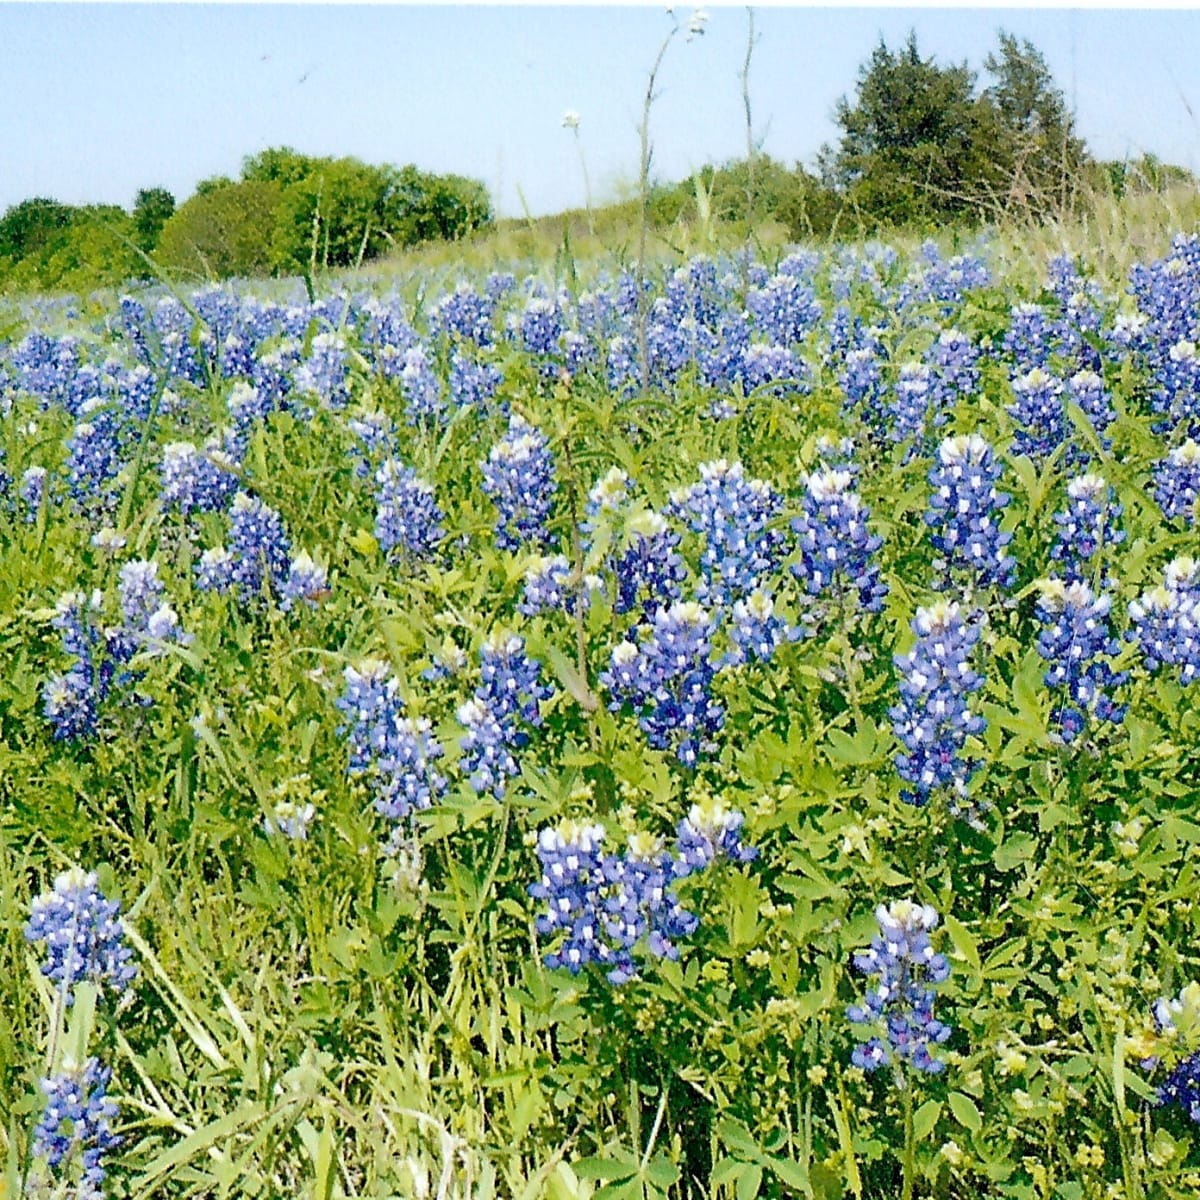 Bluebonnets And Texas Wildflowers In The Spring Lady Bird Johnson S Legacy Wanderwisdom Travel